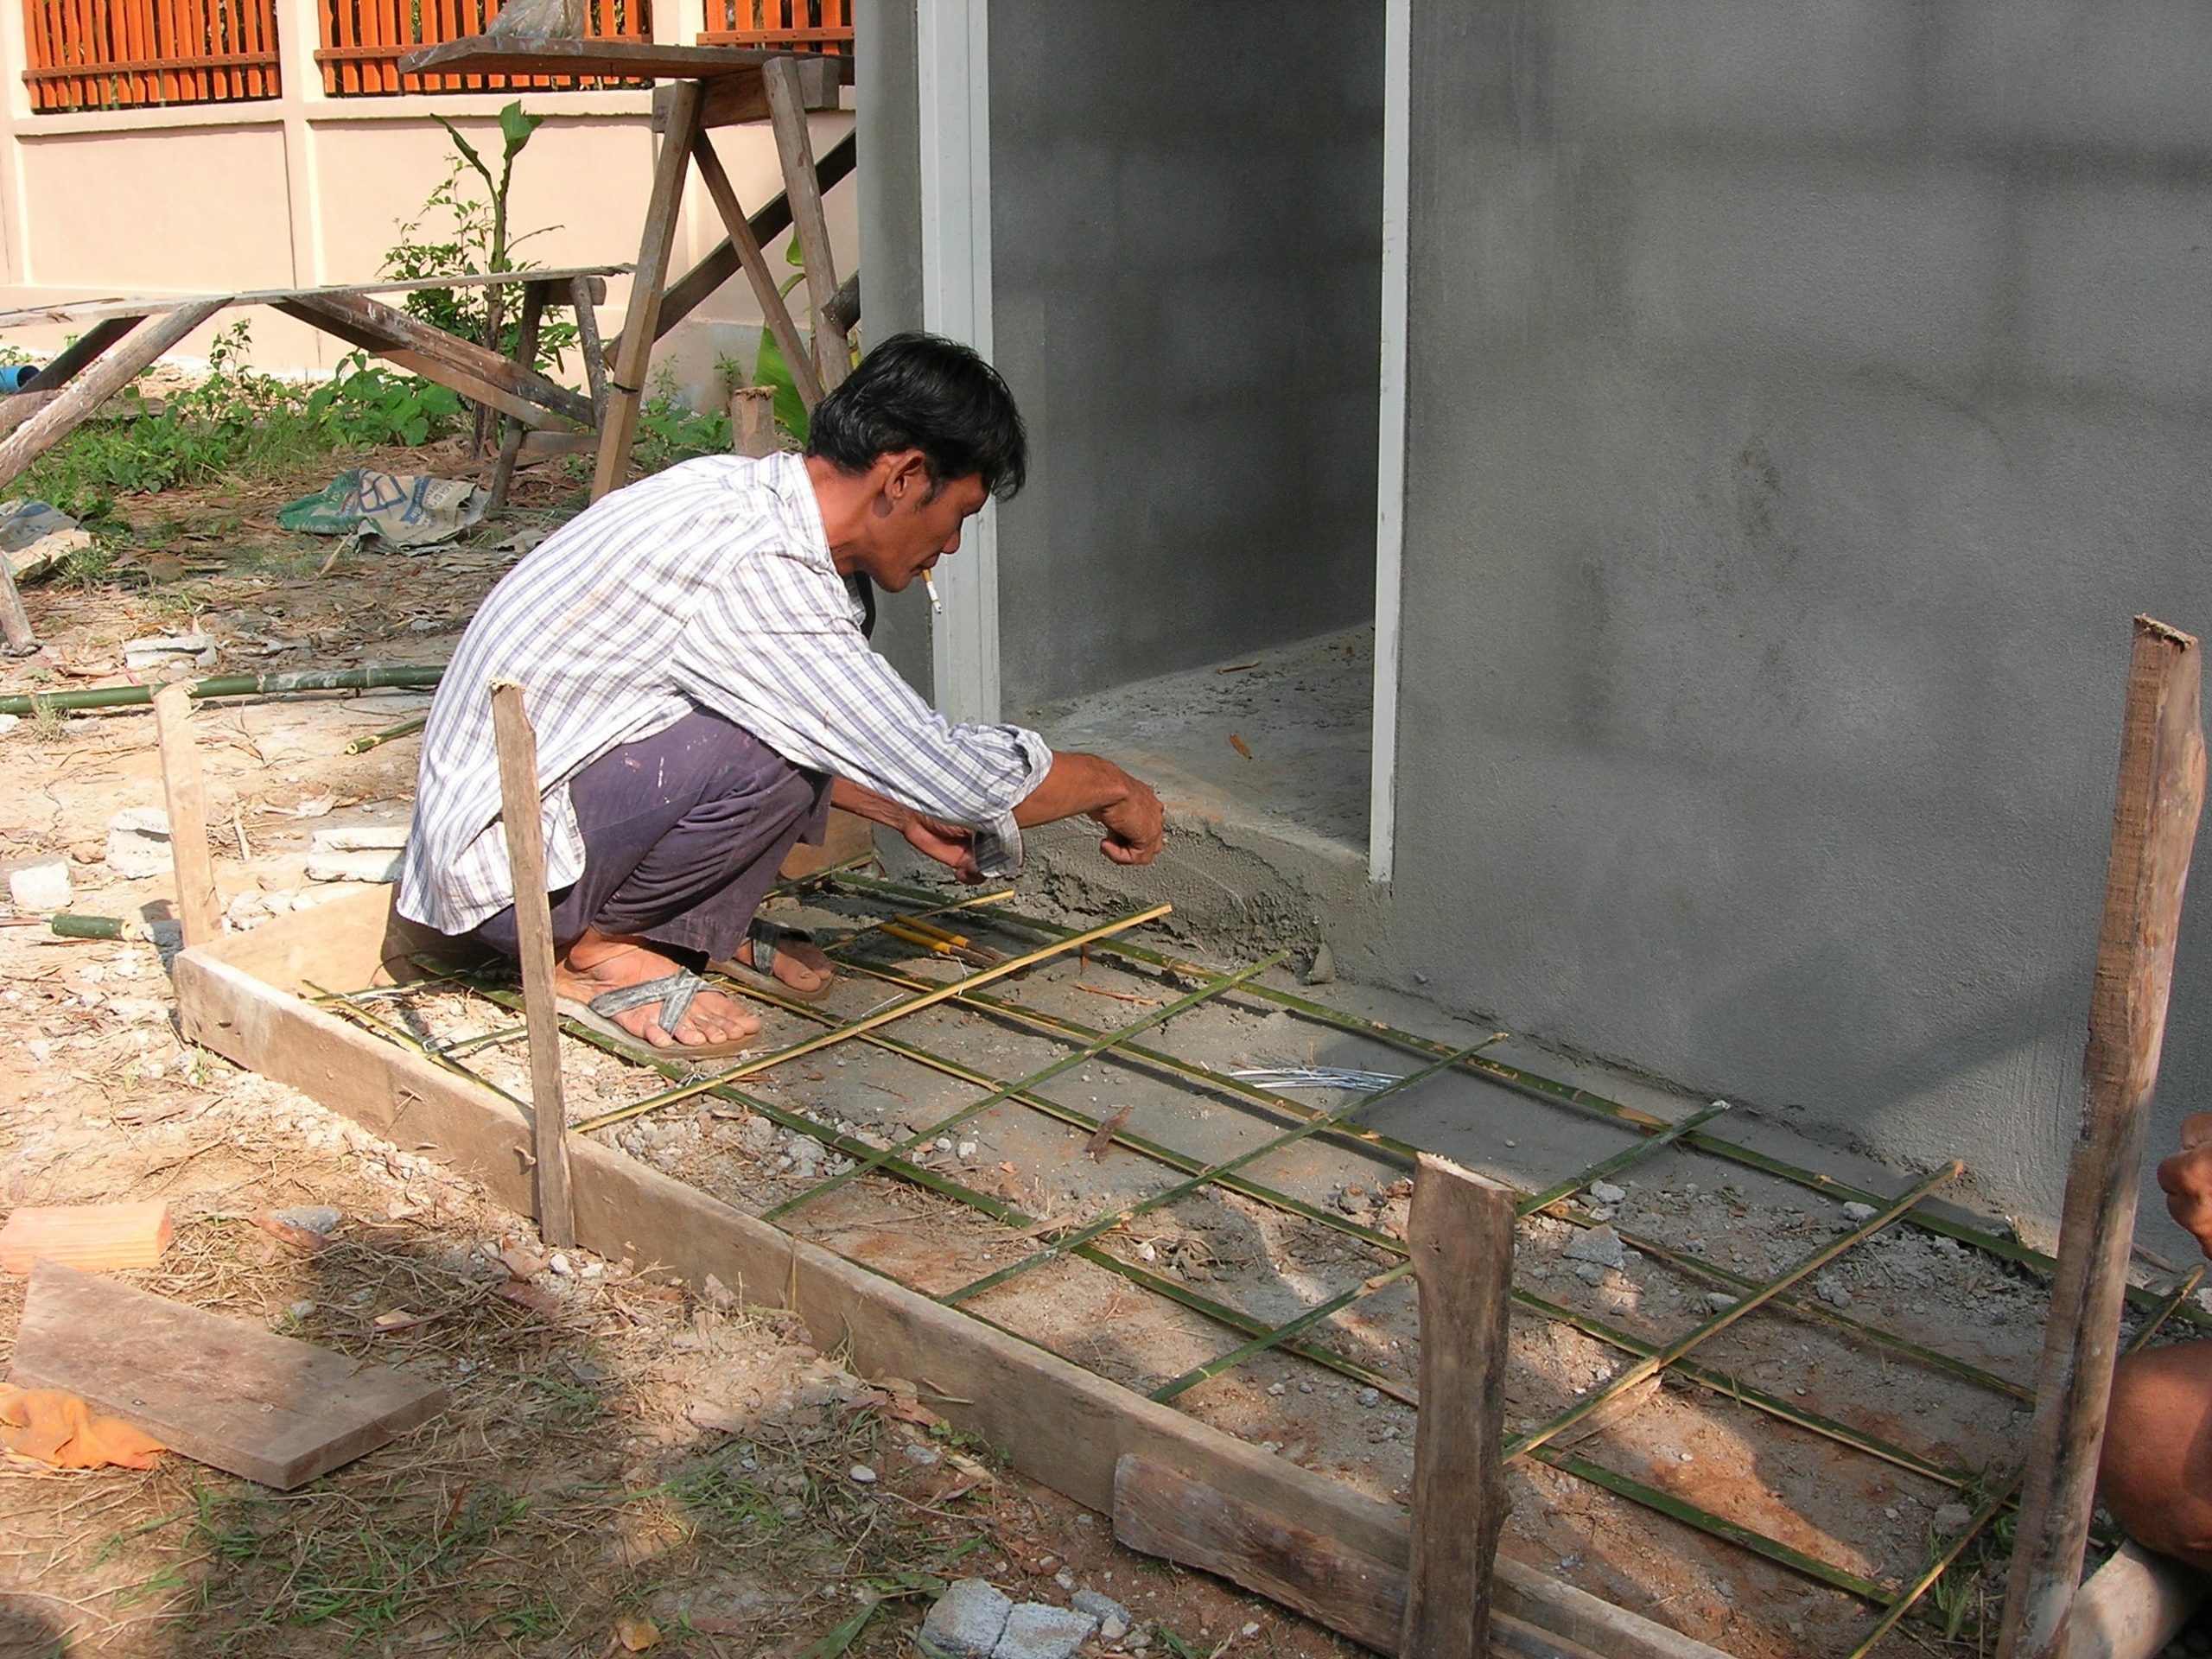 How About Using Bamboo as Alternative to Reinforcing Steel Bars?